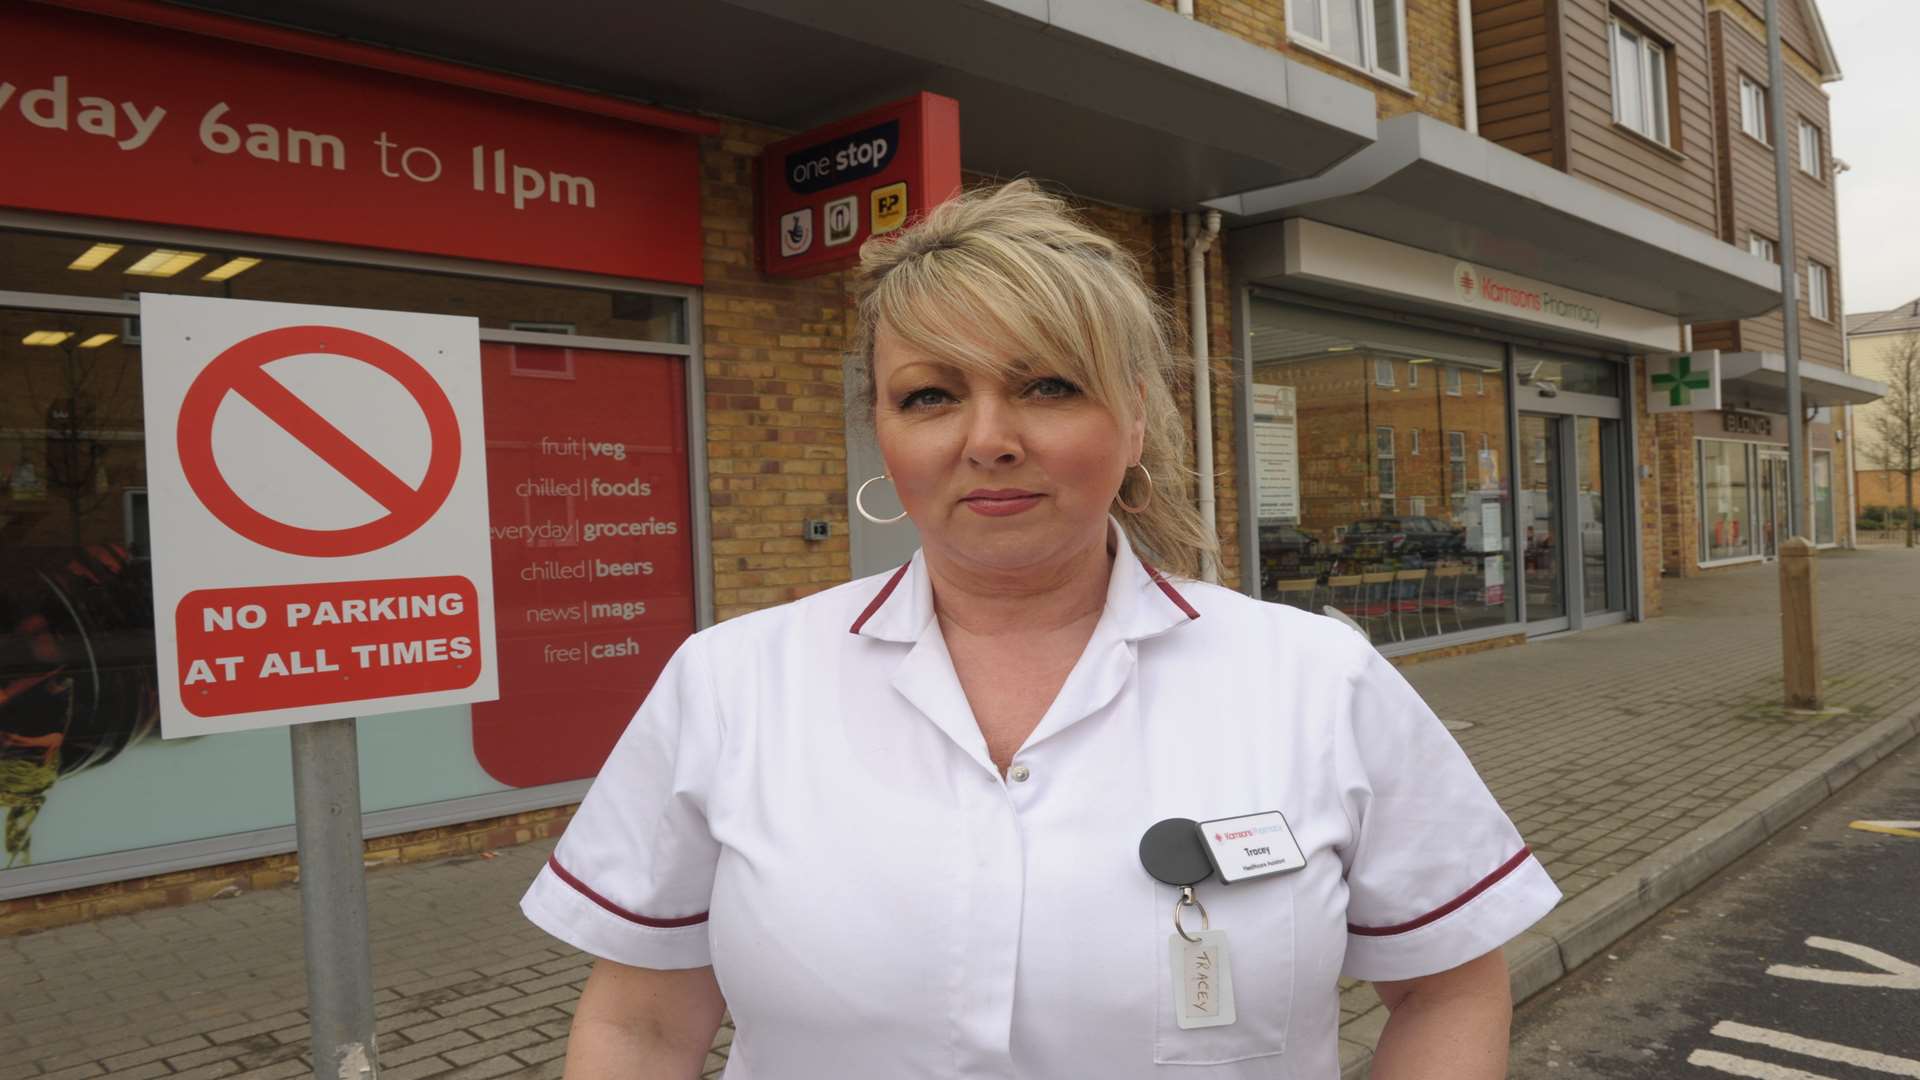 Tracey Lawrence, who works in the chemist, is unhappy about the loss of parking spaces